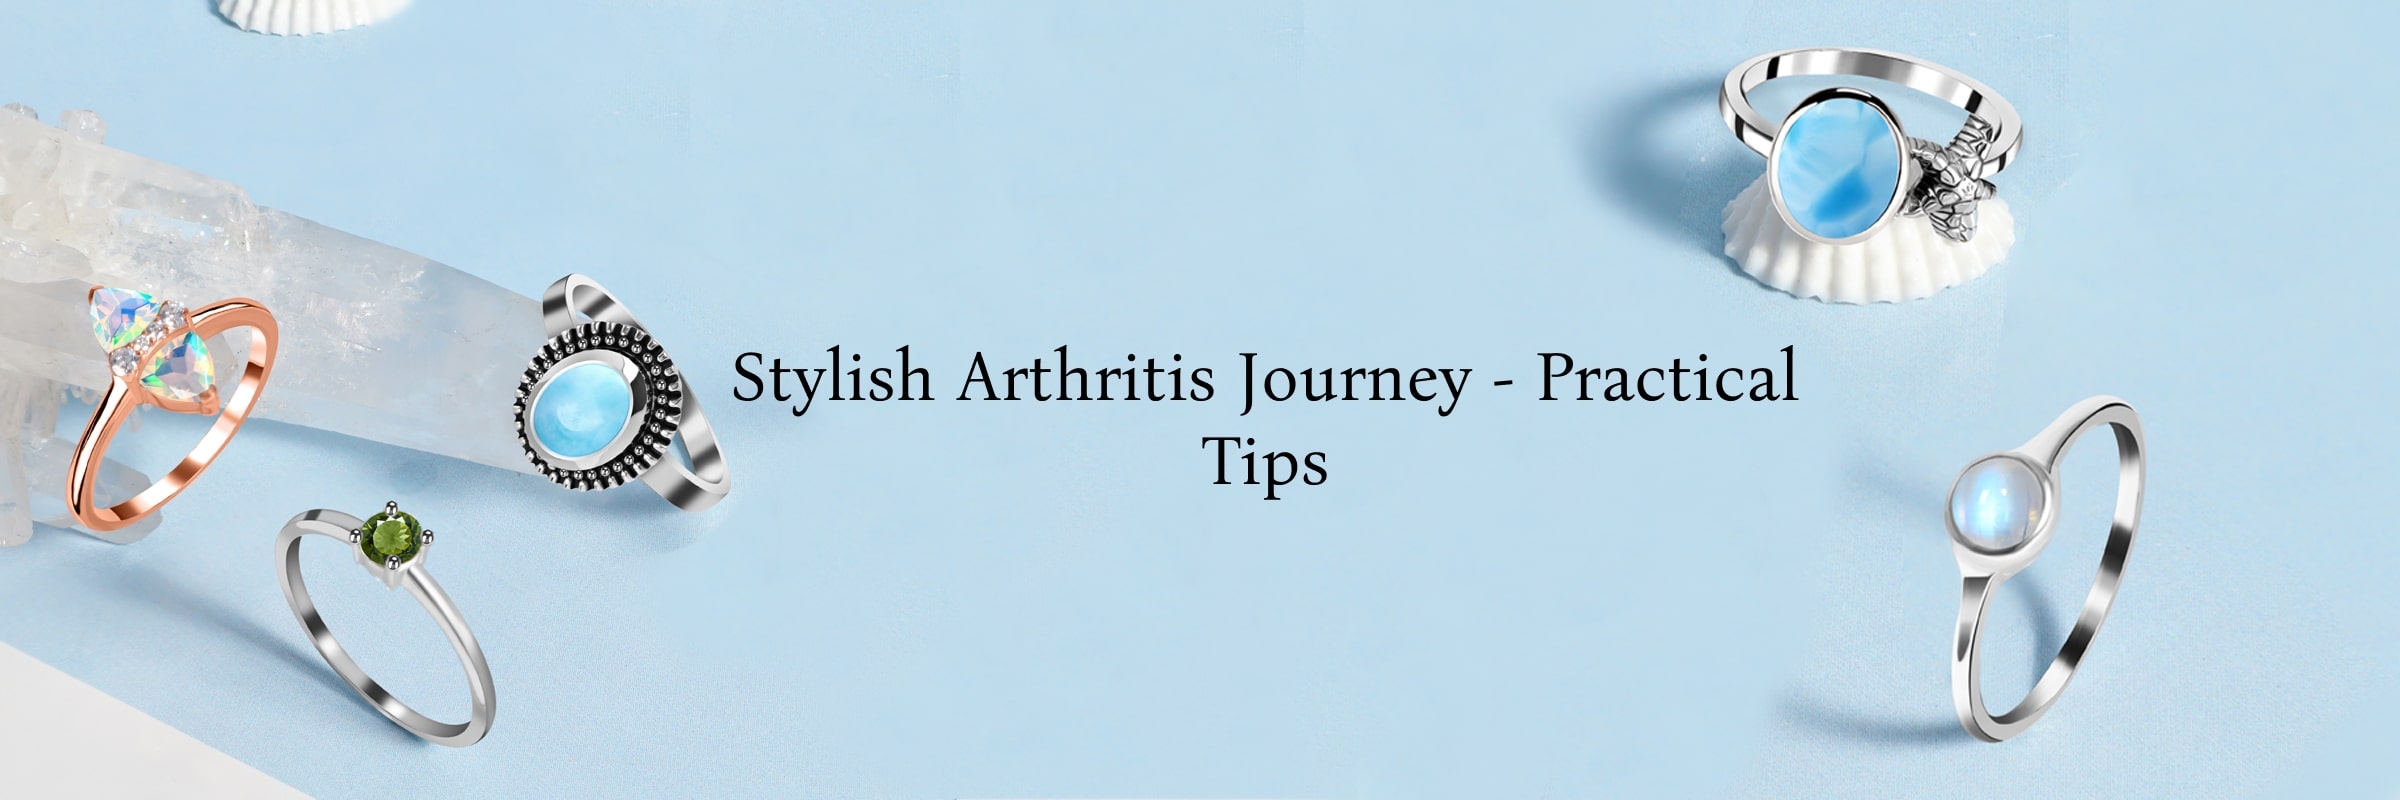 Tips For A Stylish Journey with Arthritis